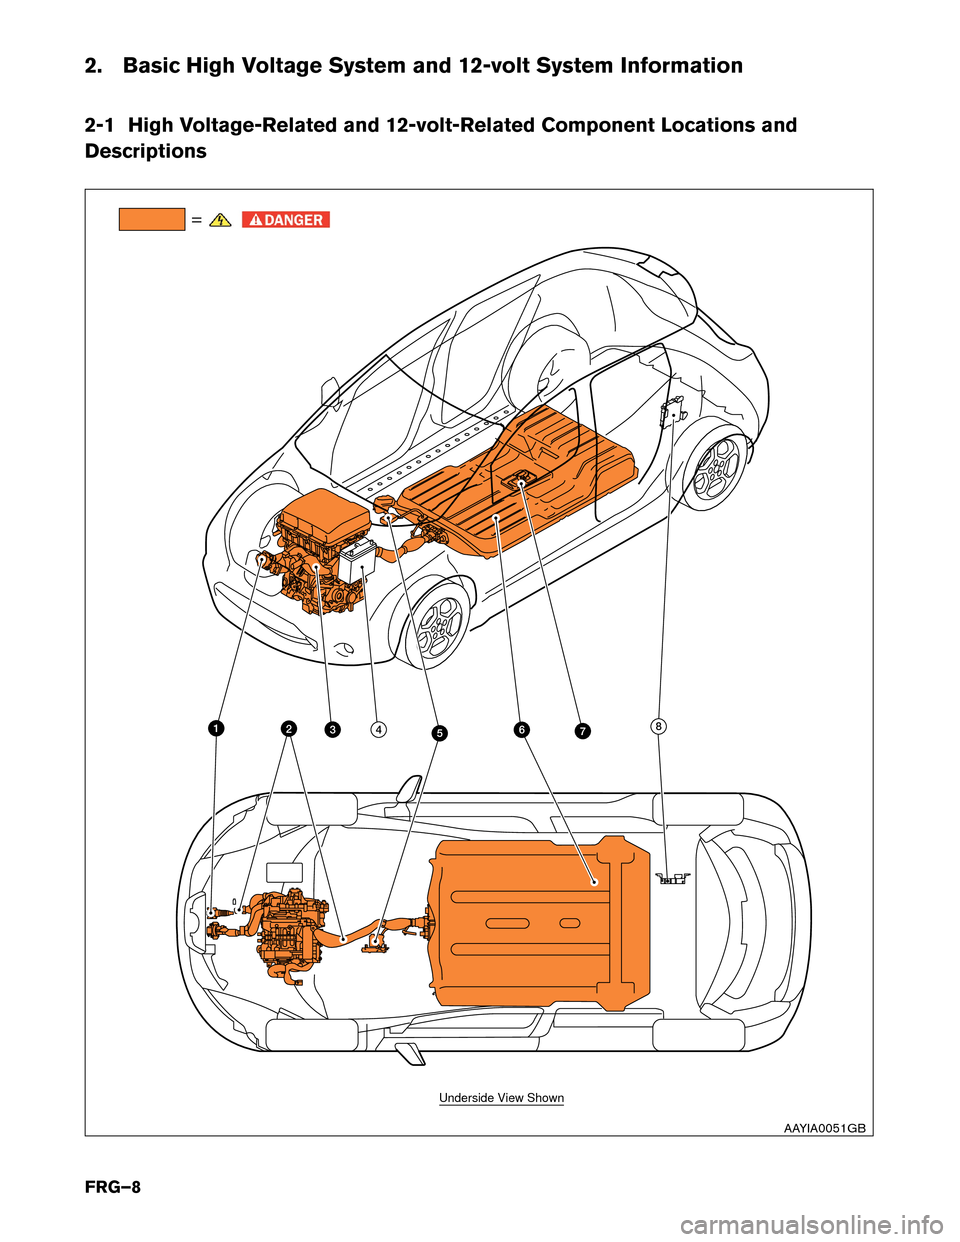 NISSAN LEAF 2016 1.G First Responders Guide 2. Basic High Voltage System and 12-volt System Information
2-1
High Voltage-Related and 12-volt-Related Component Locations and
Descriptions =
76
342 8
5 1
Underside View Shown
AAYIA0051GB
FRG–8  